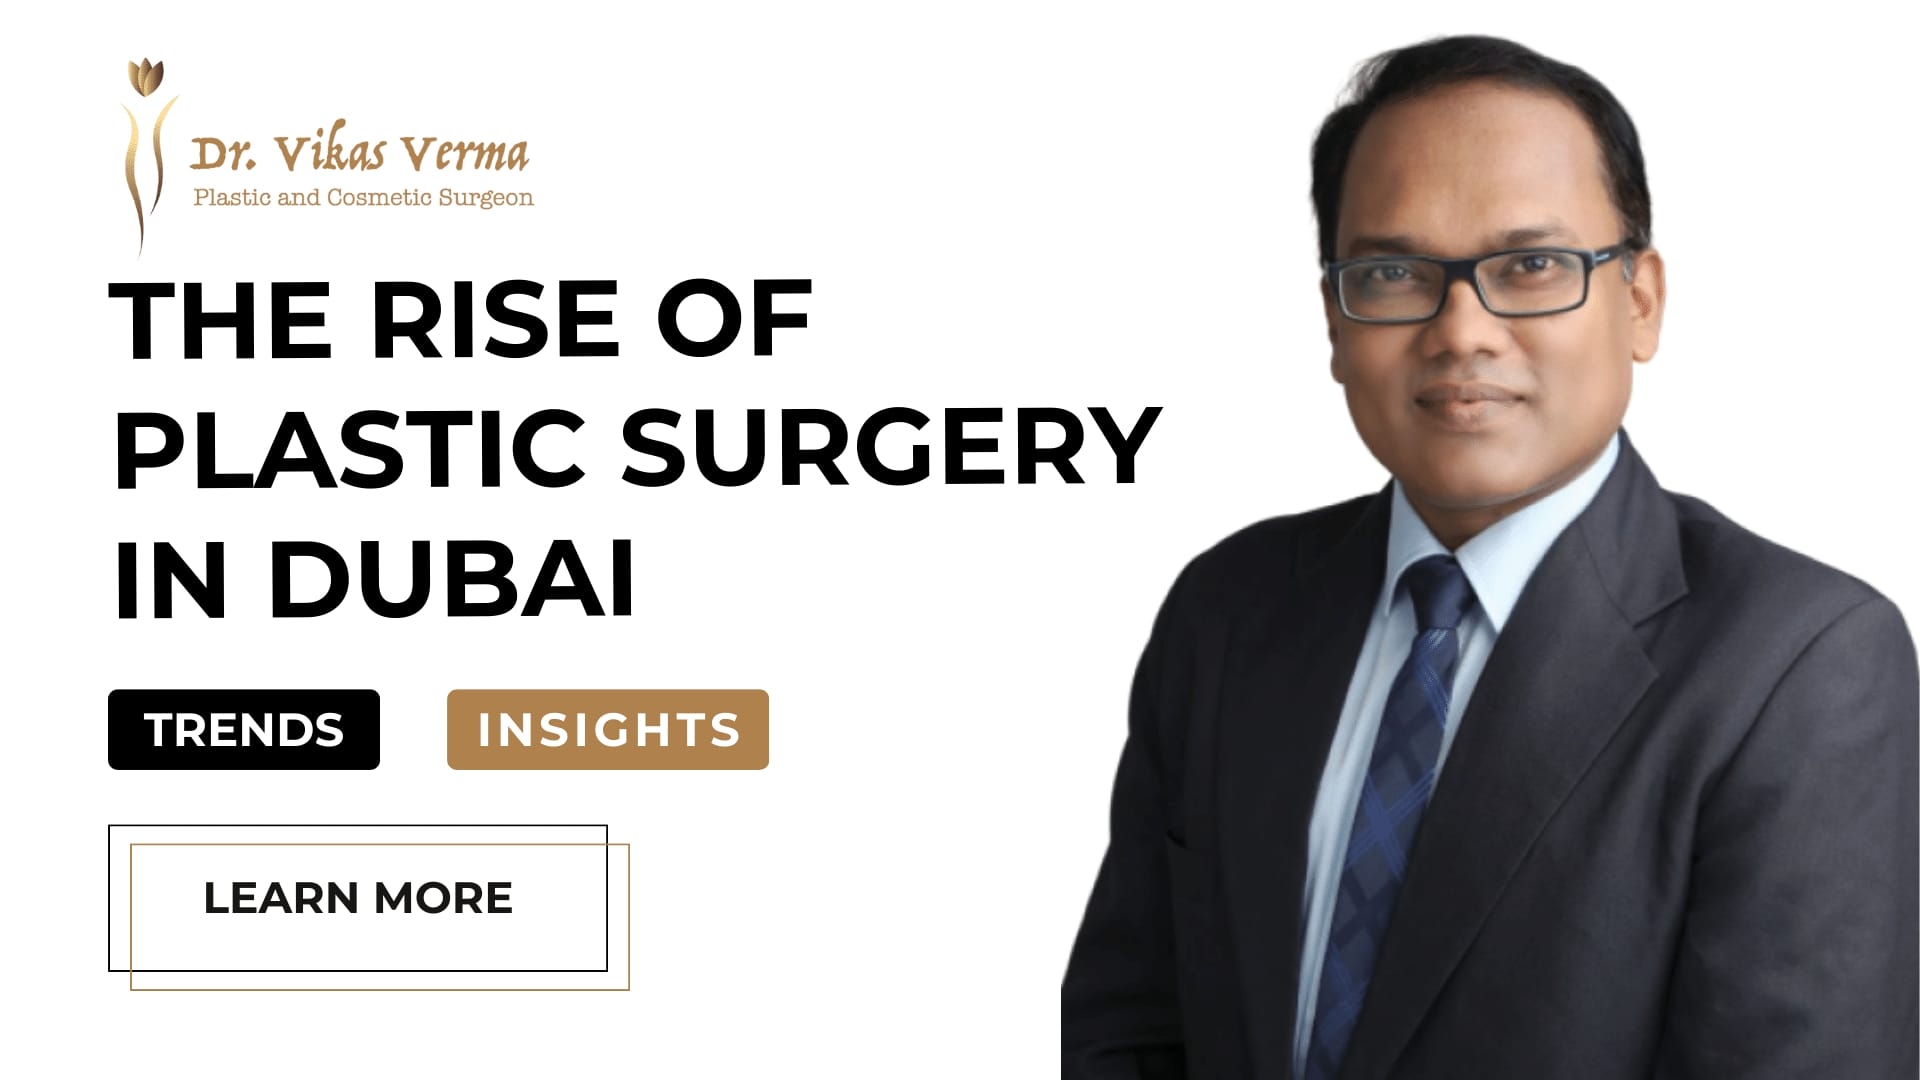 The Rise of Plastic Surgery Trends in Dubai